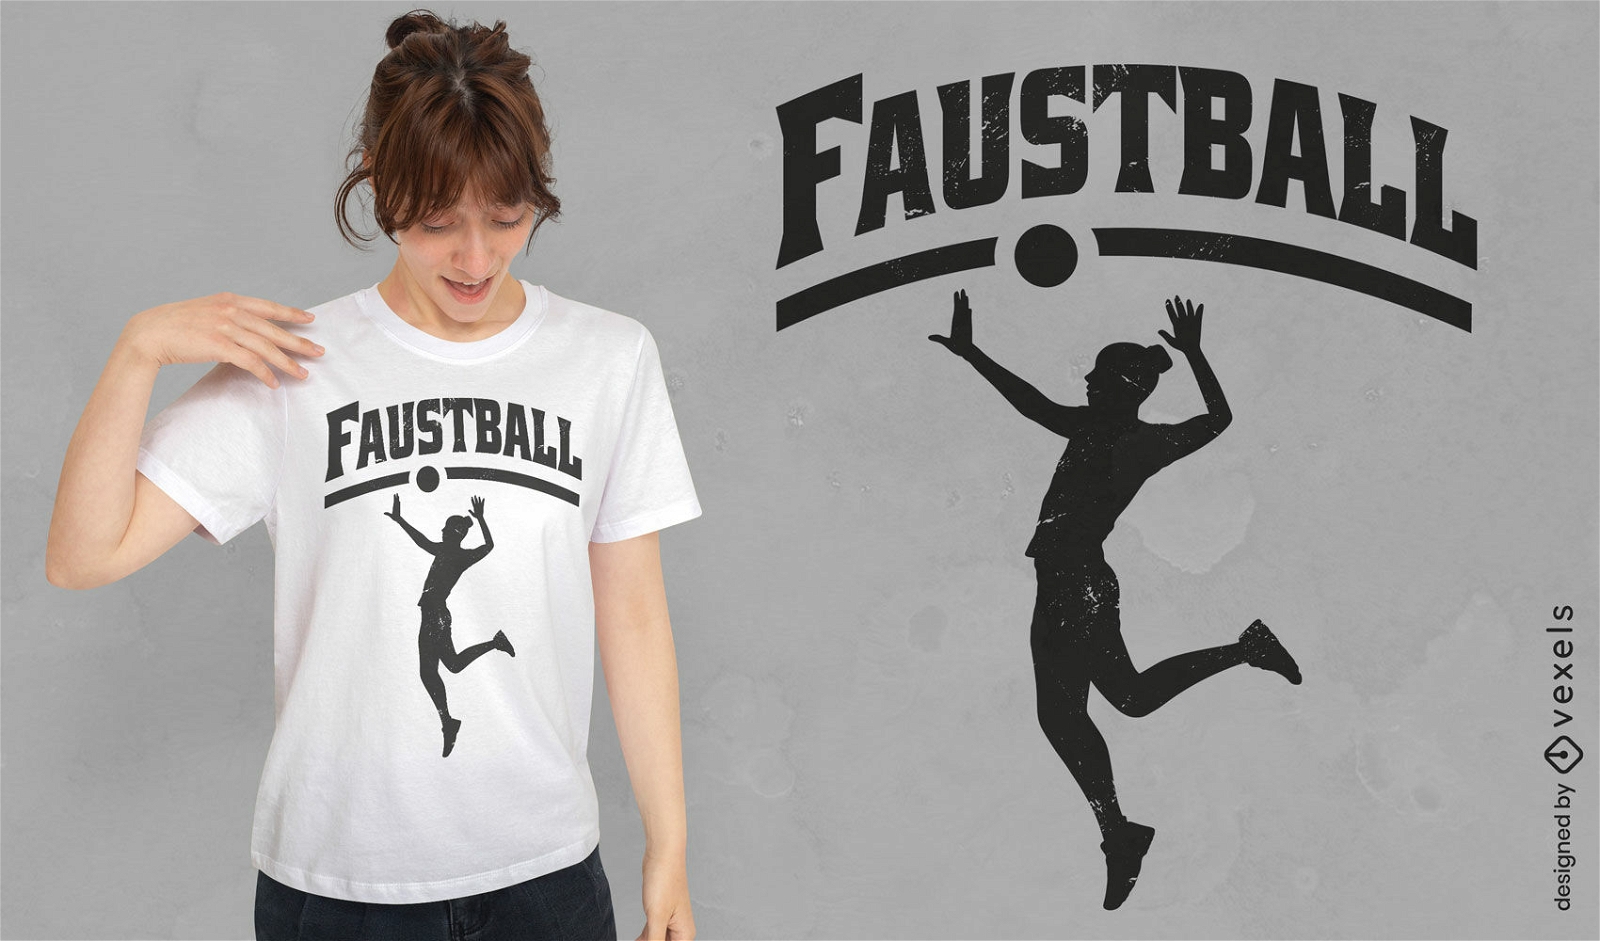 Person playing faustball t-shirt design